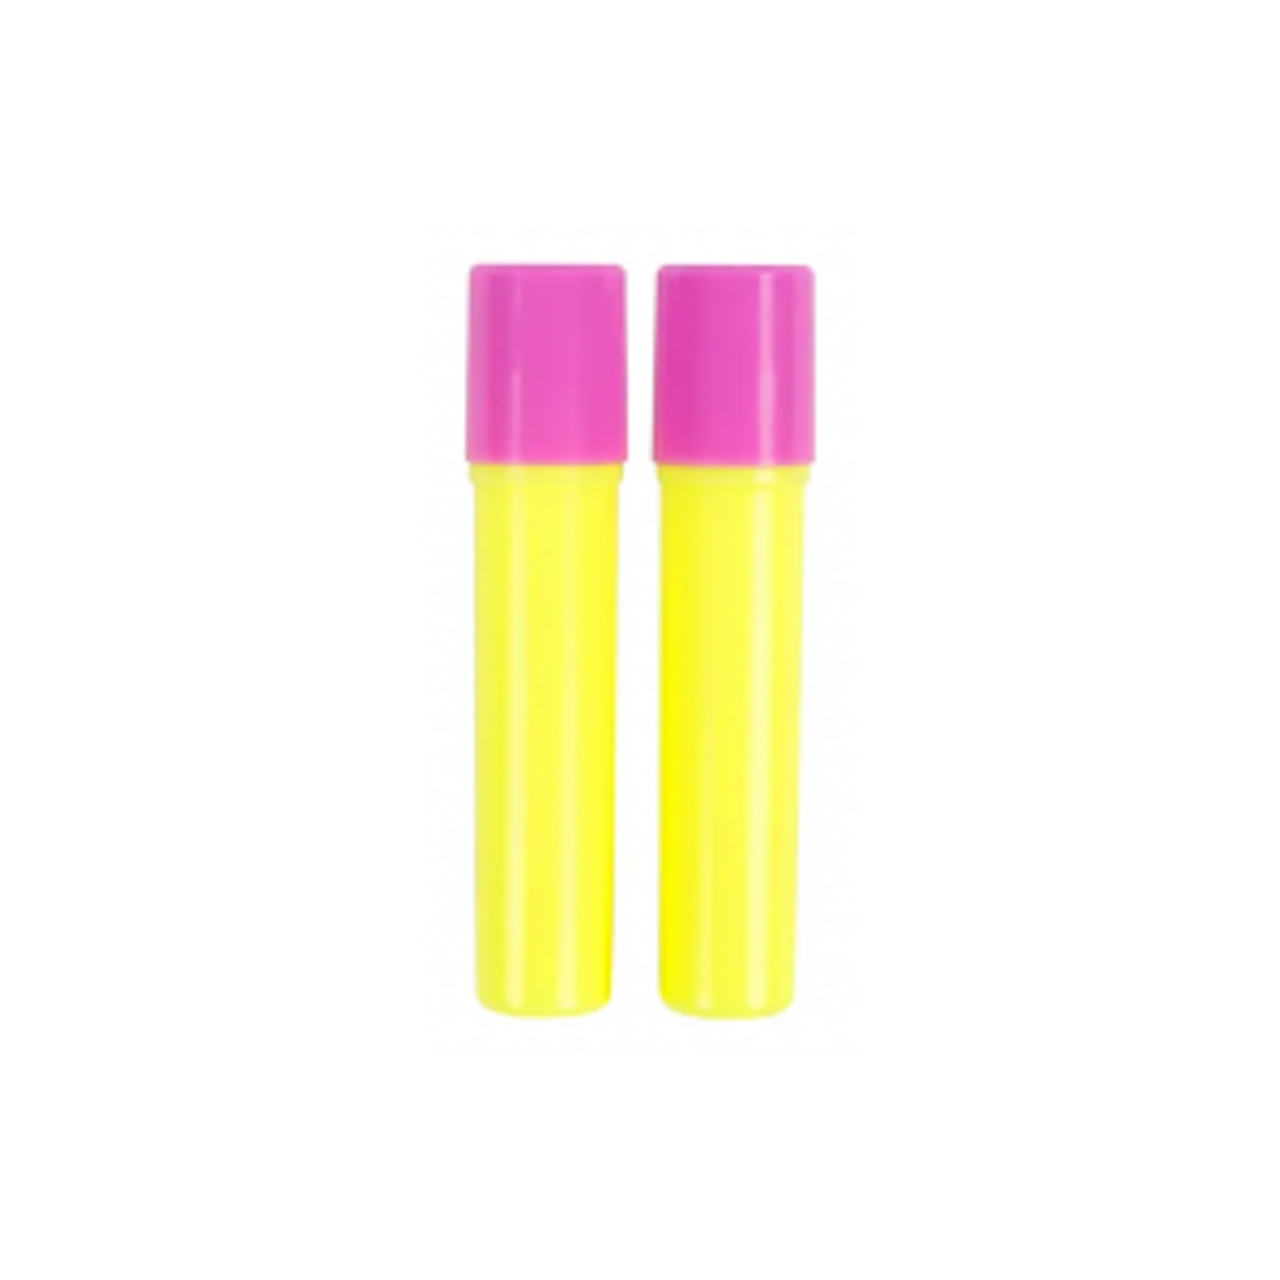 Yellow Refill for Glue Pen - 2 Pack